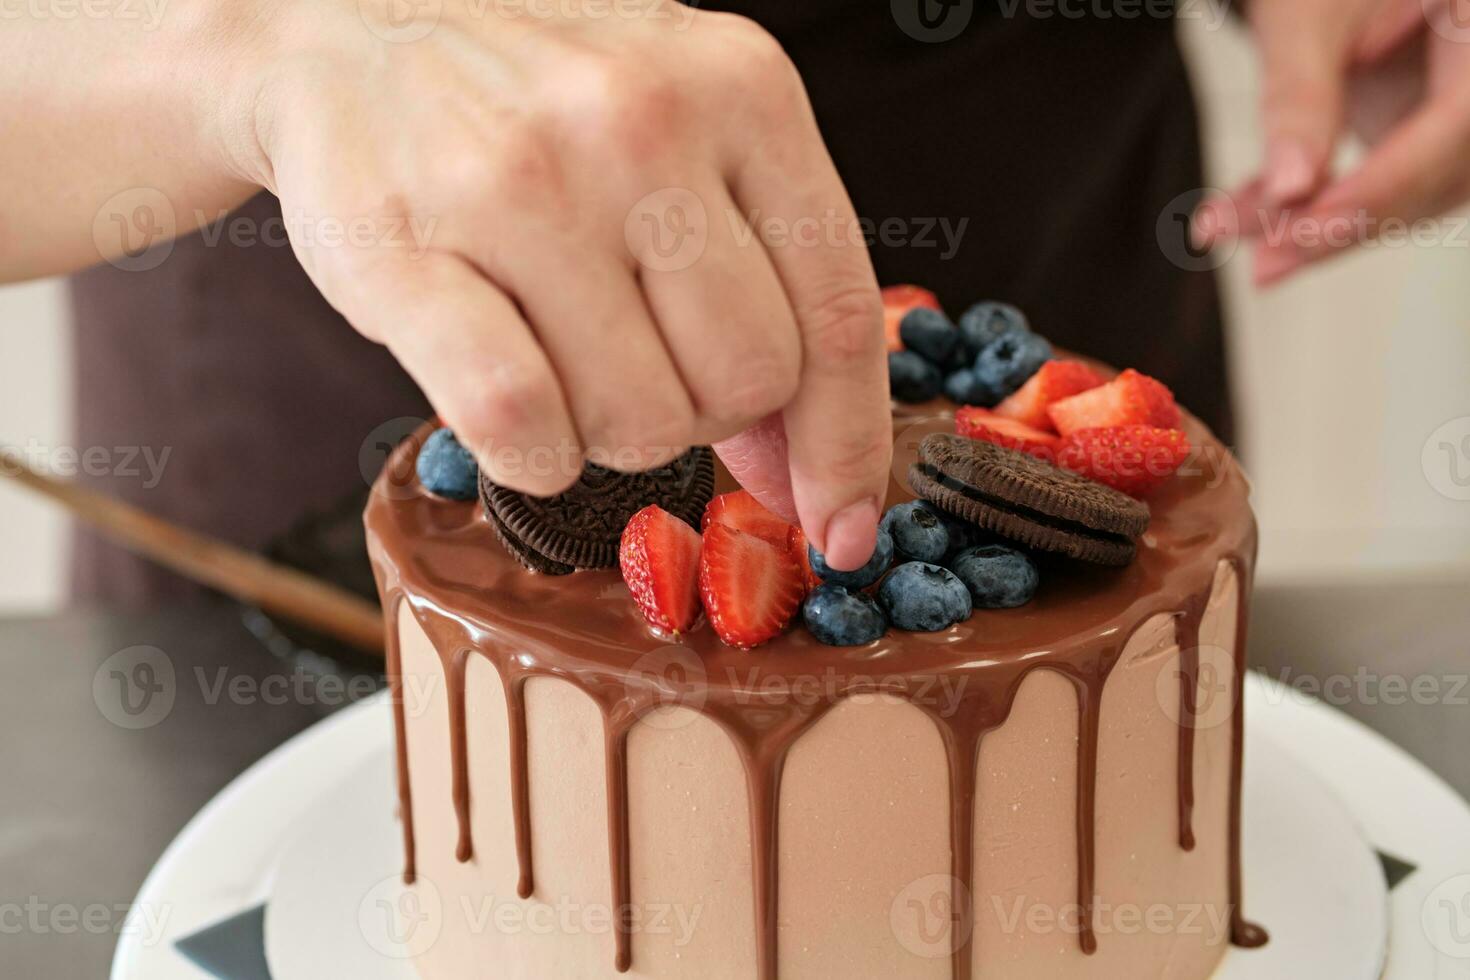 Woman pastry chef decorates chocolate cake with berries and cookies, close-up. Cake making process, Selective focus photo